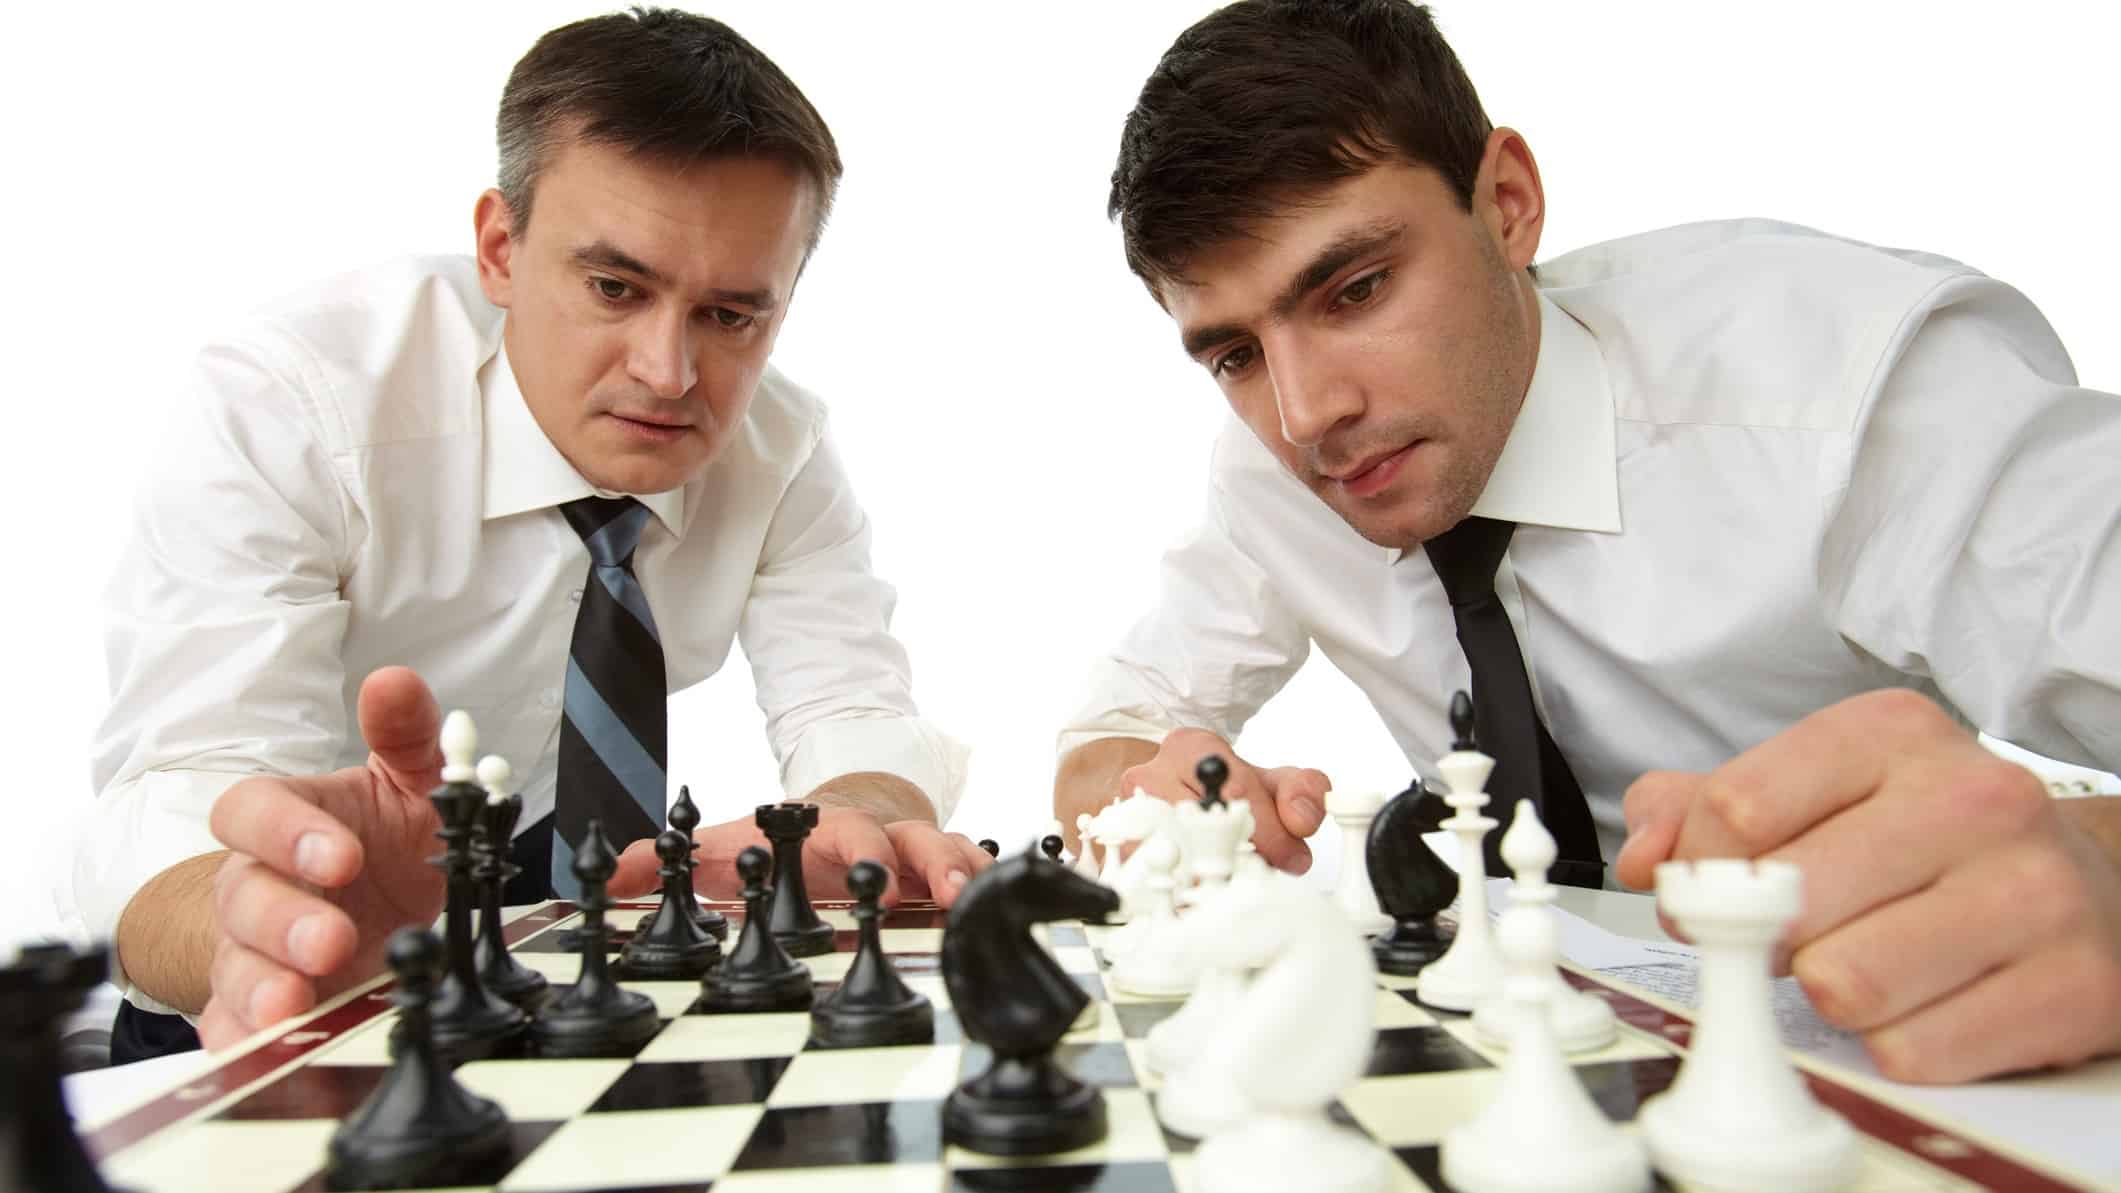 Two men in business attire play chess.